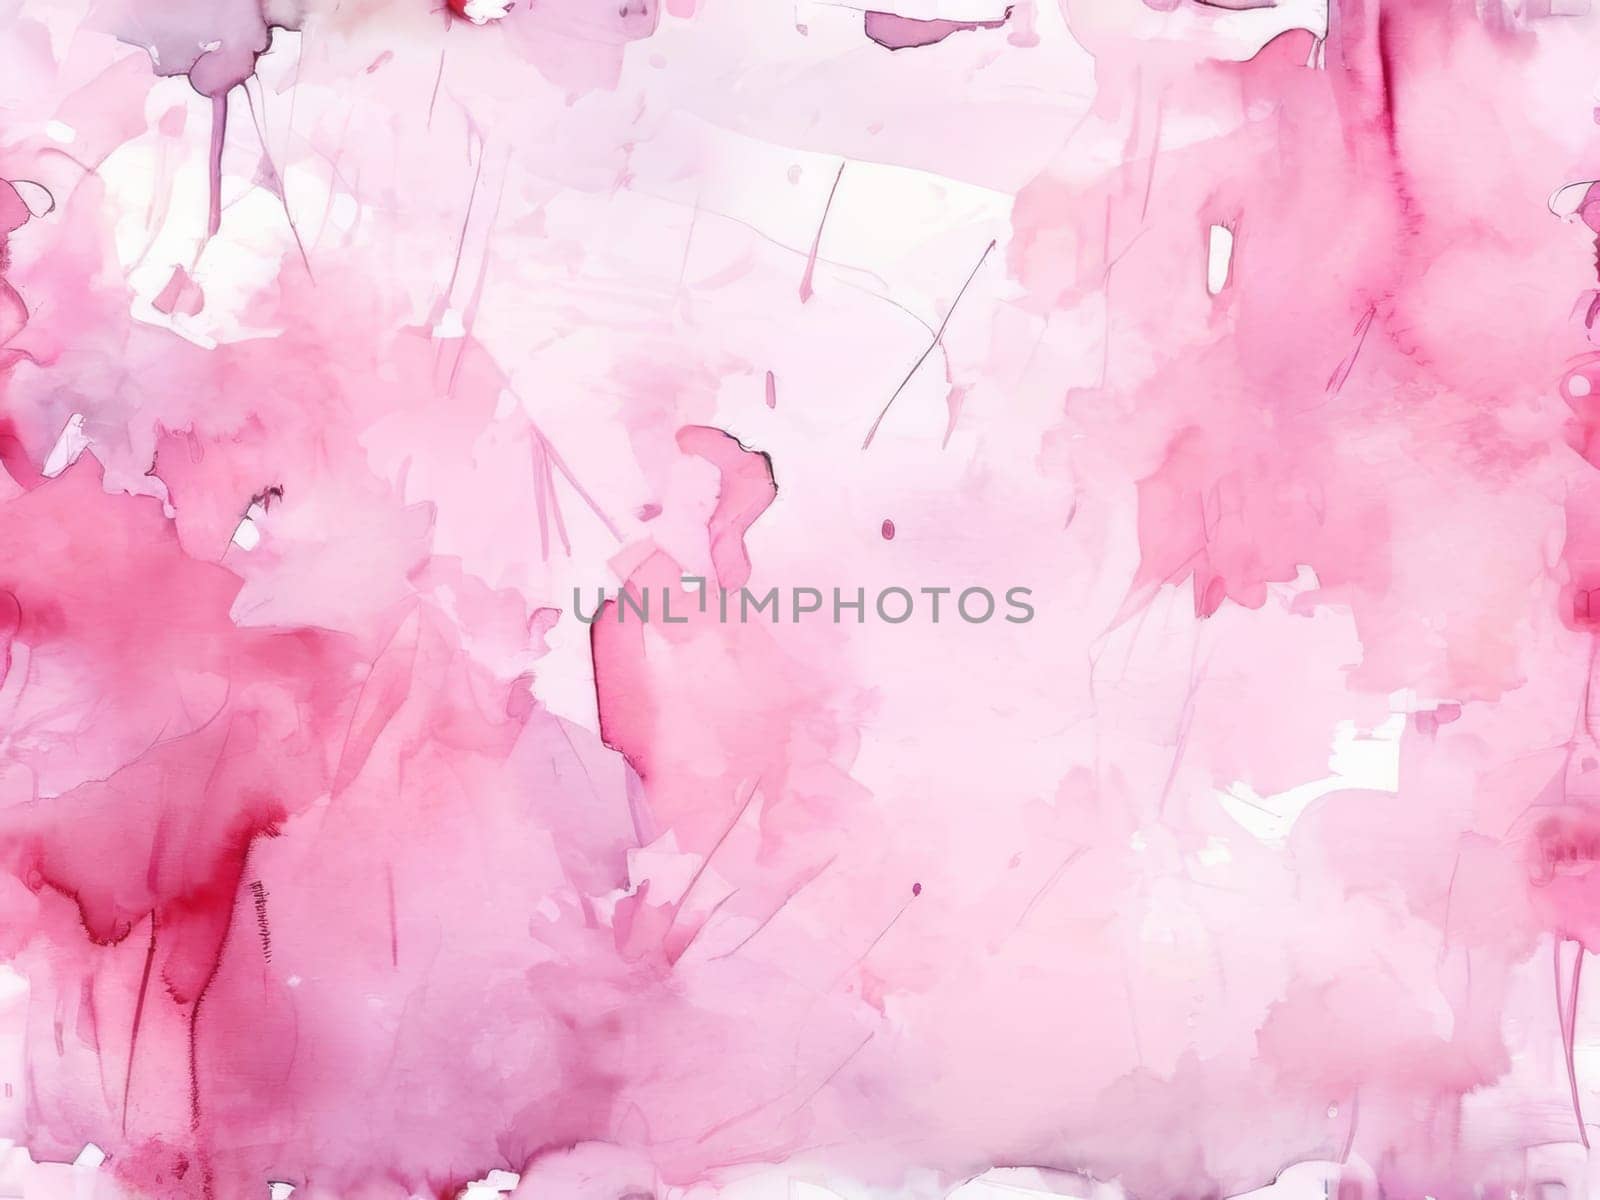 Pink watercolor background. Bright watercolor backdrop with pink brushes smears on white paper background as watercolor background with copy space.